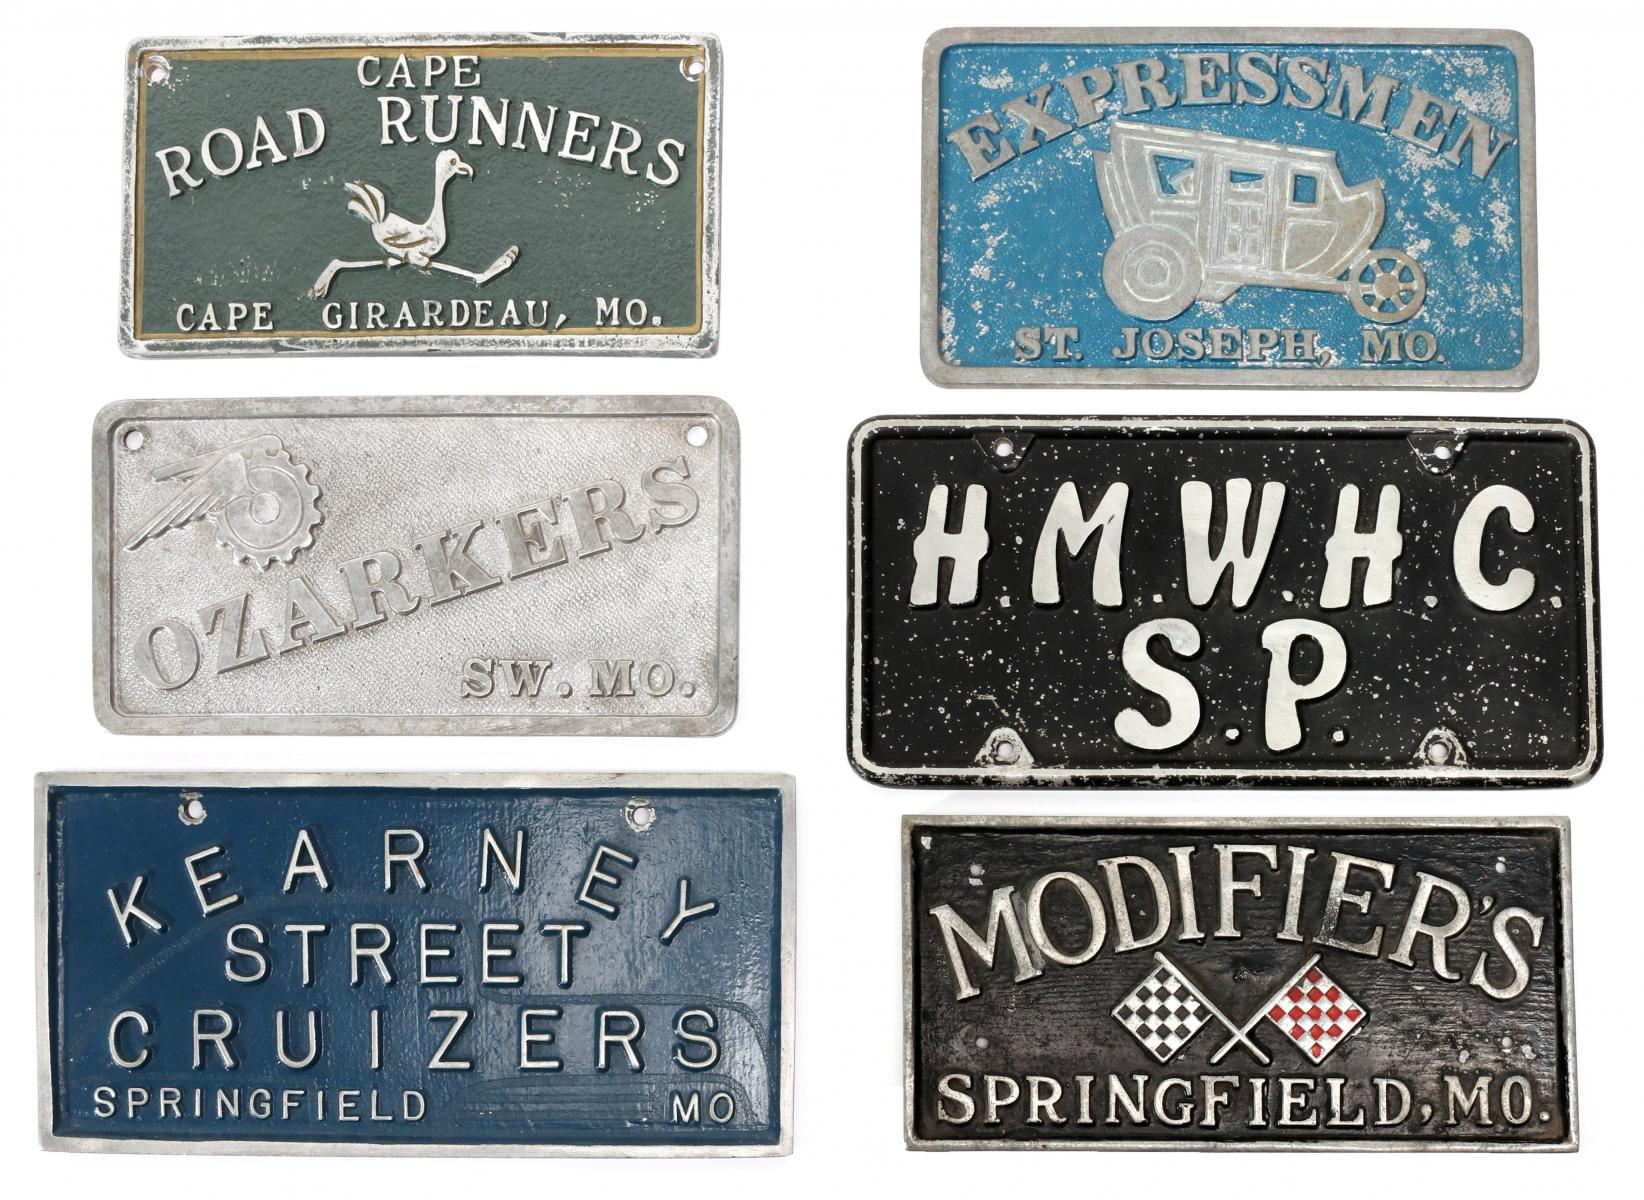 COLLECTION OF MID- TO LATE-20TH C. CAR CLUB MEMBER TAGS